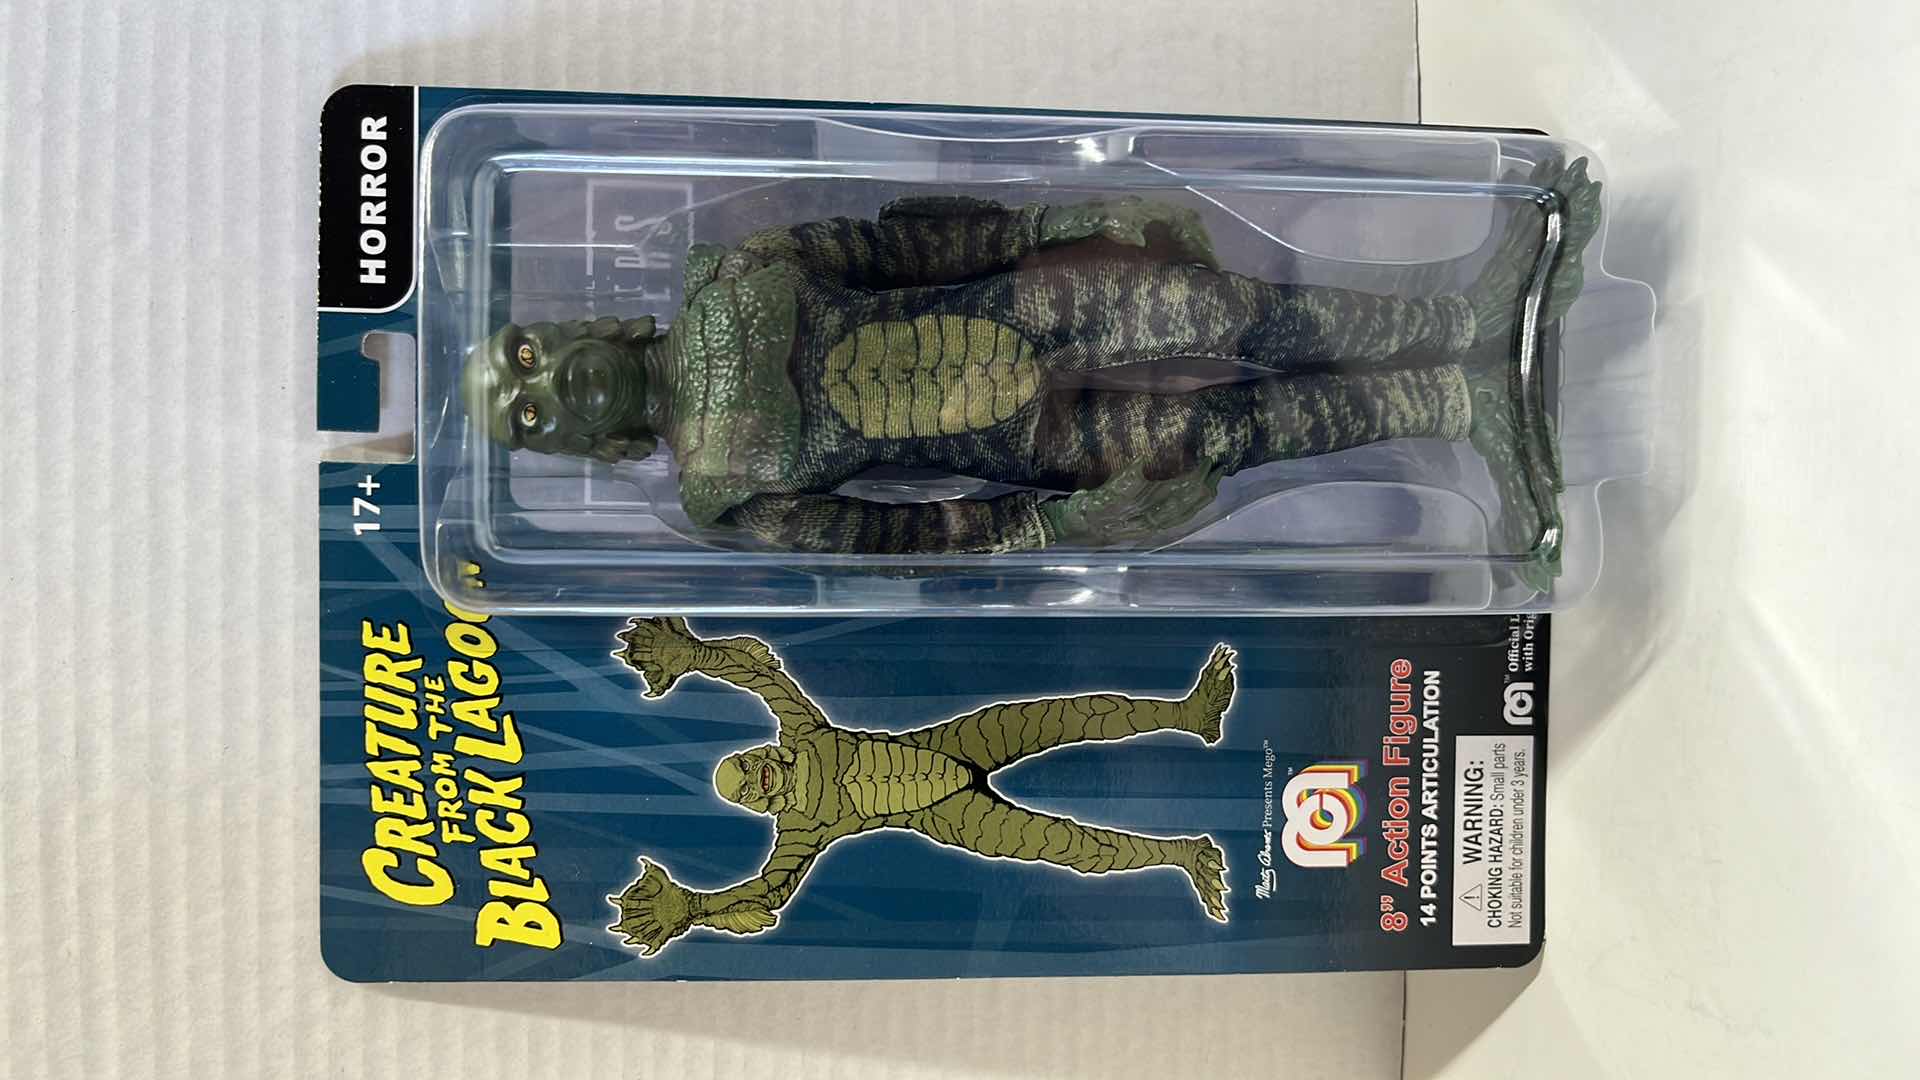 Photo 4 of NIB WORLDS GREATEST MEGO MONSTERS 8” ACTION FIGURE, TEEN WOLF & CREATURE FROM THE BLACK LAGOON (2)